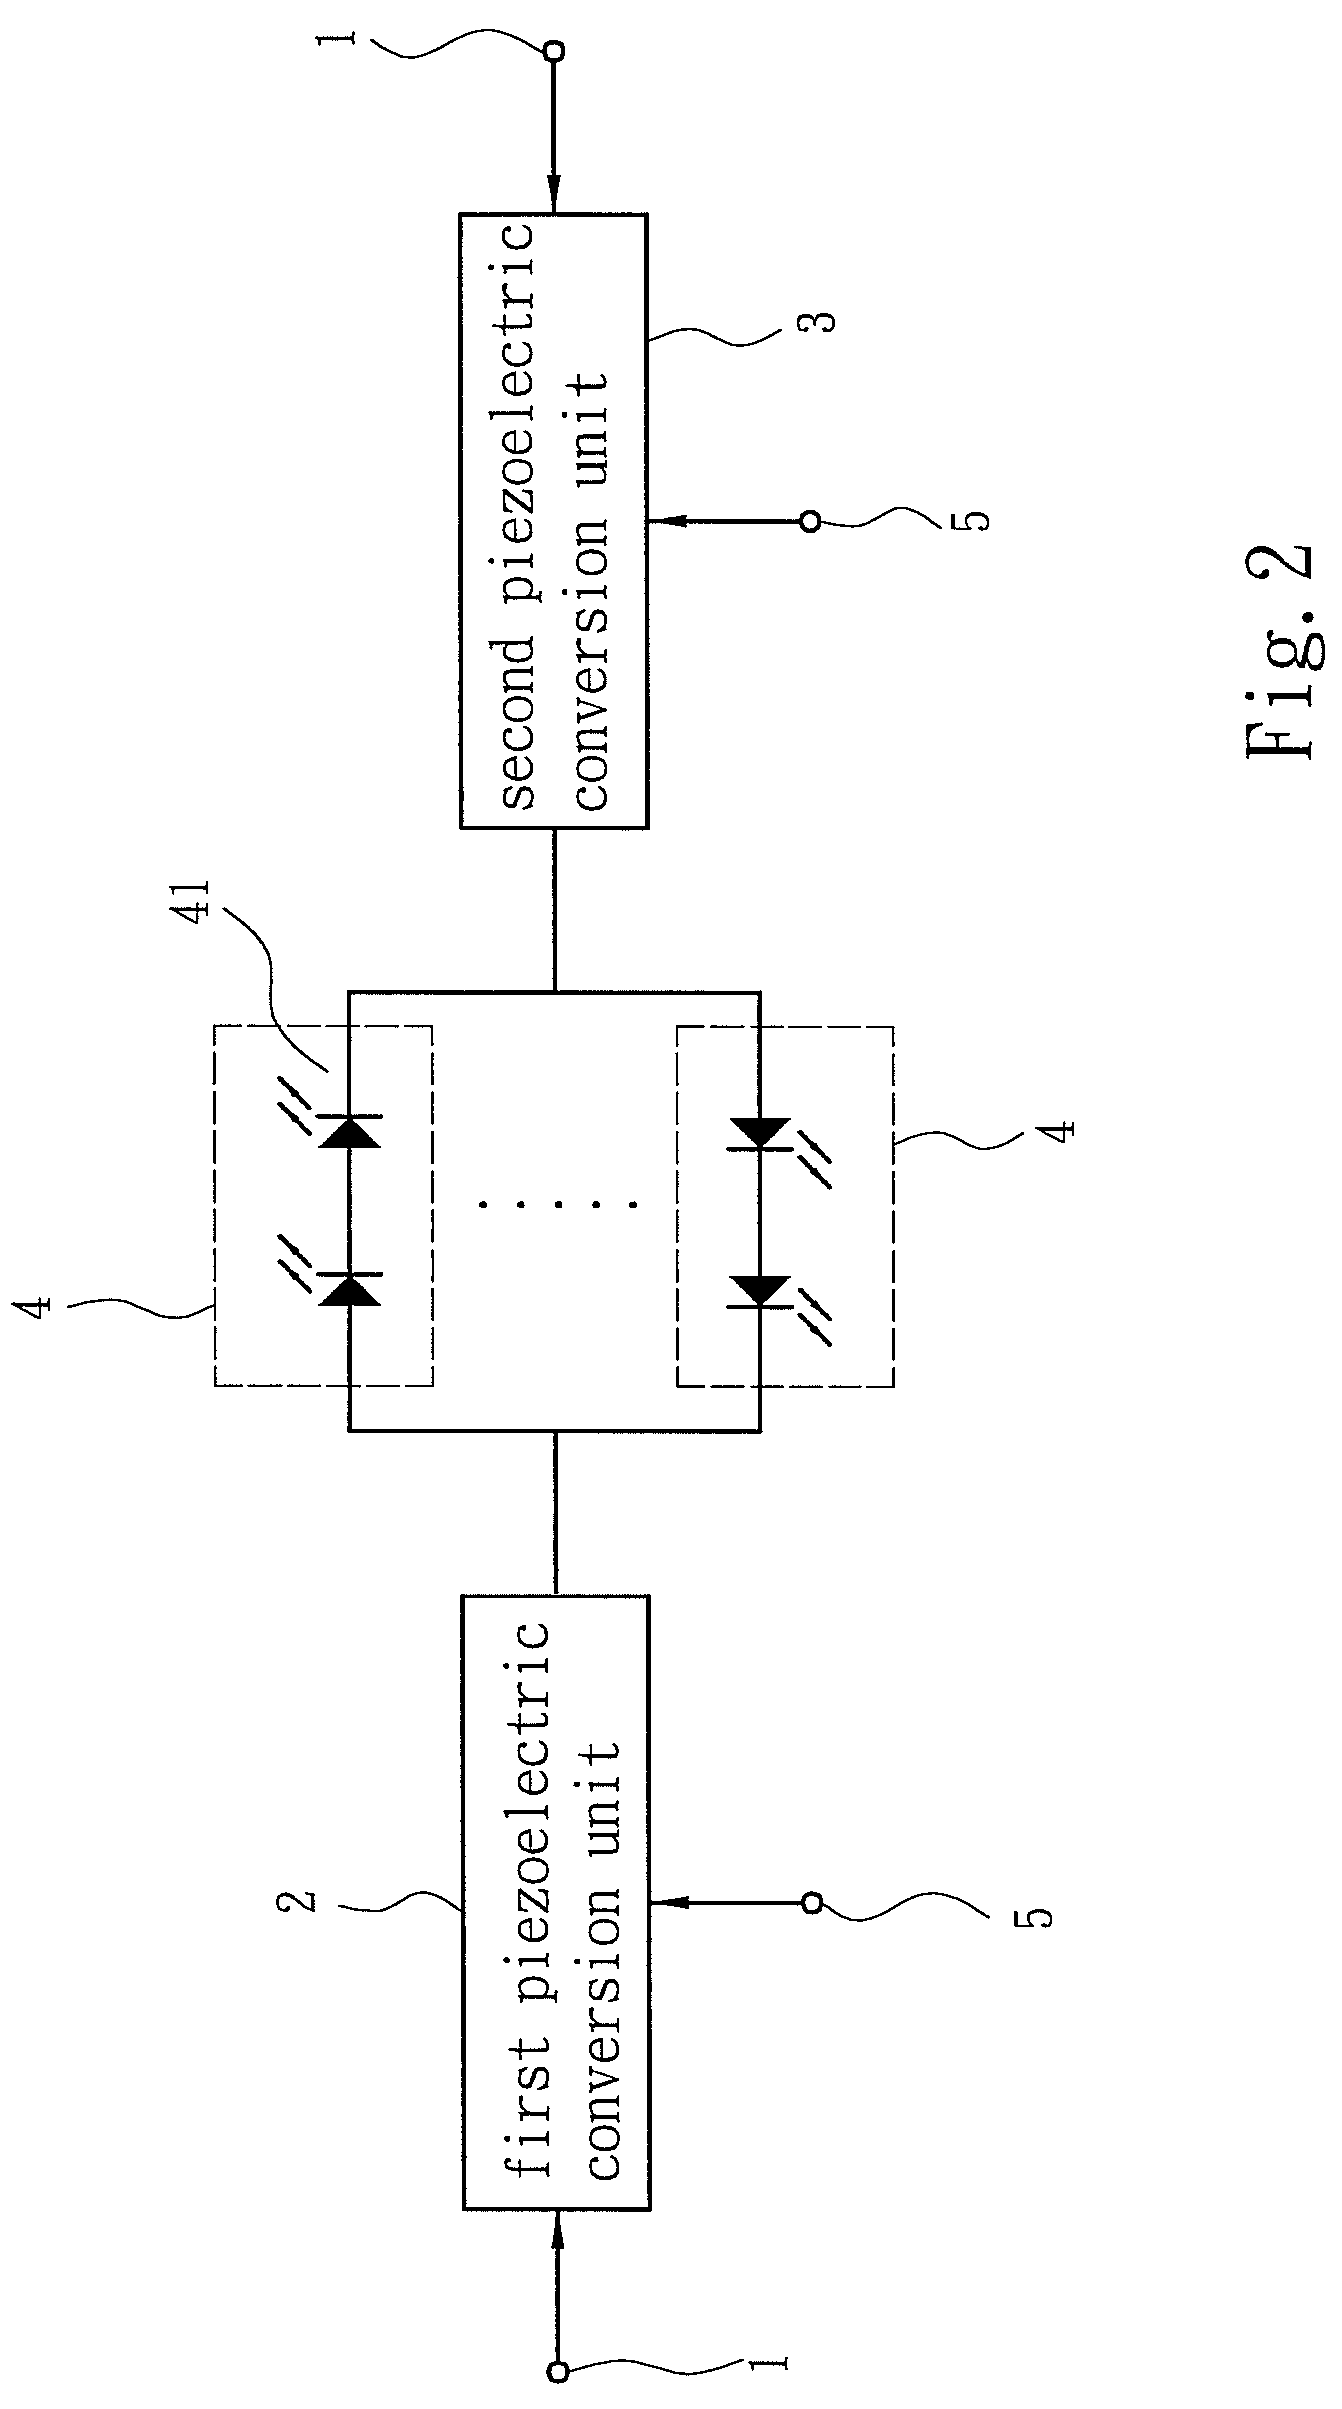 LED driver structure